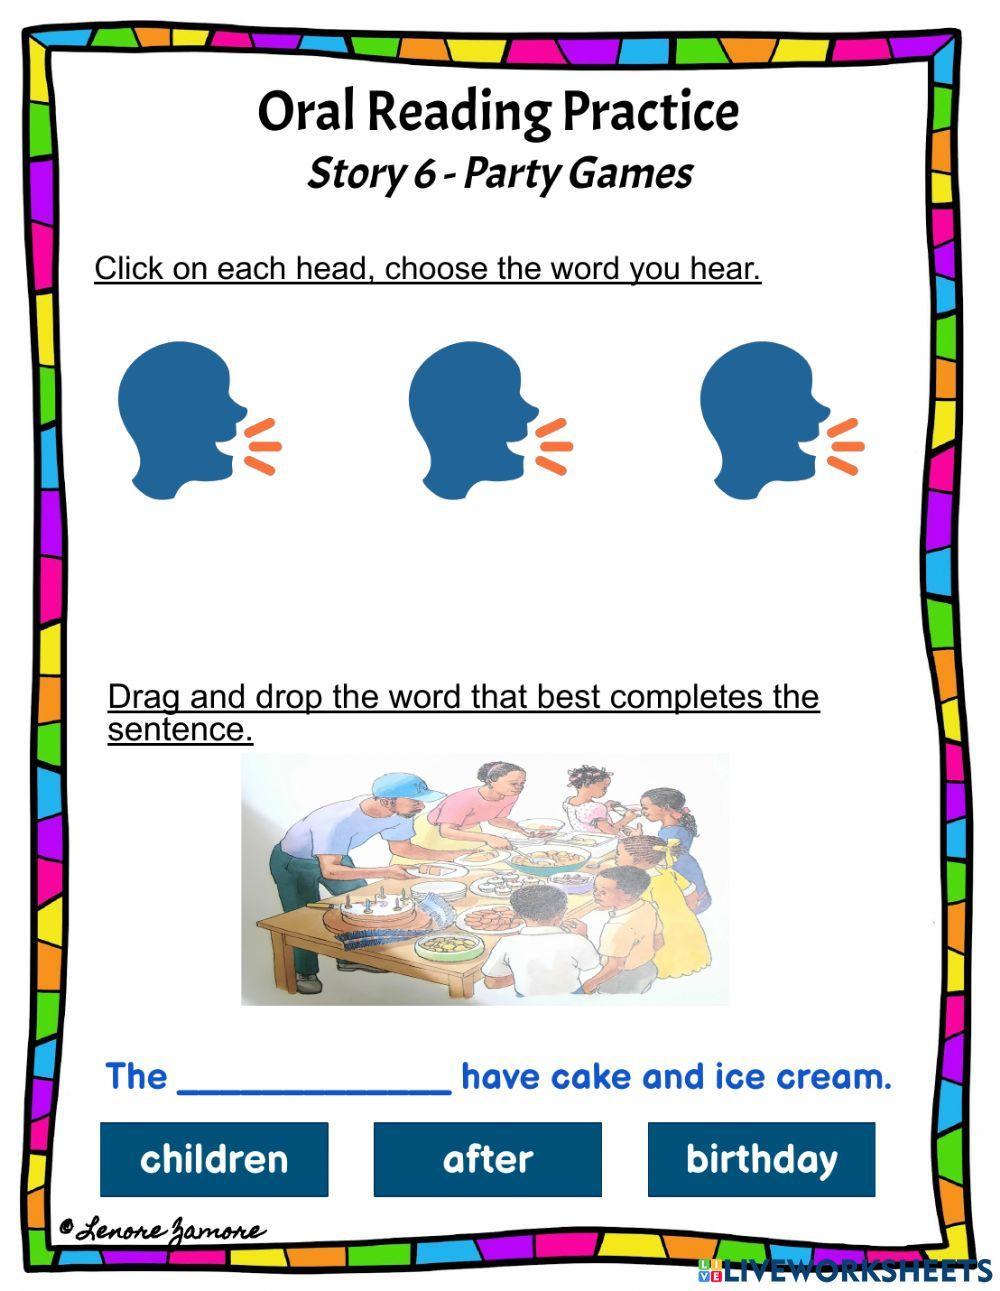 Oral Reading Practice - Story 6